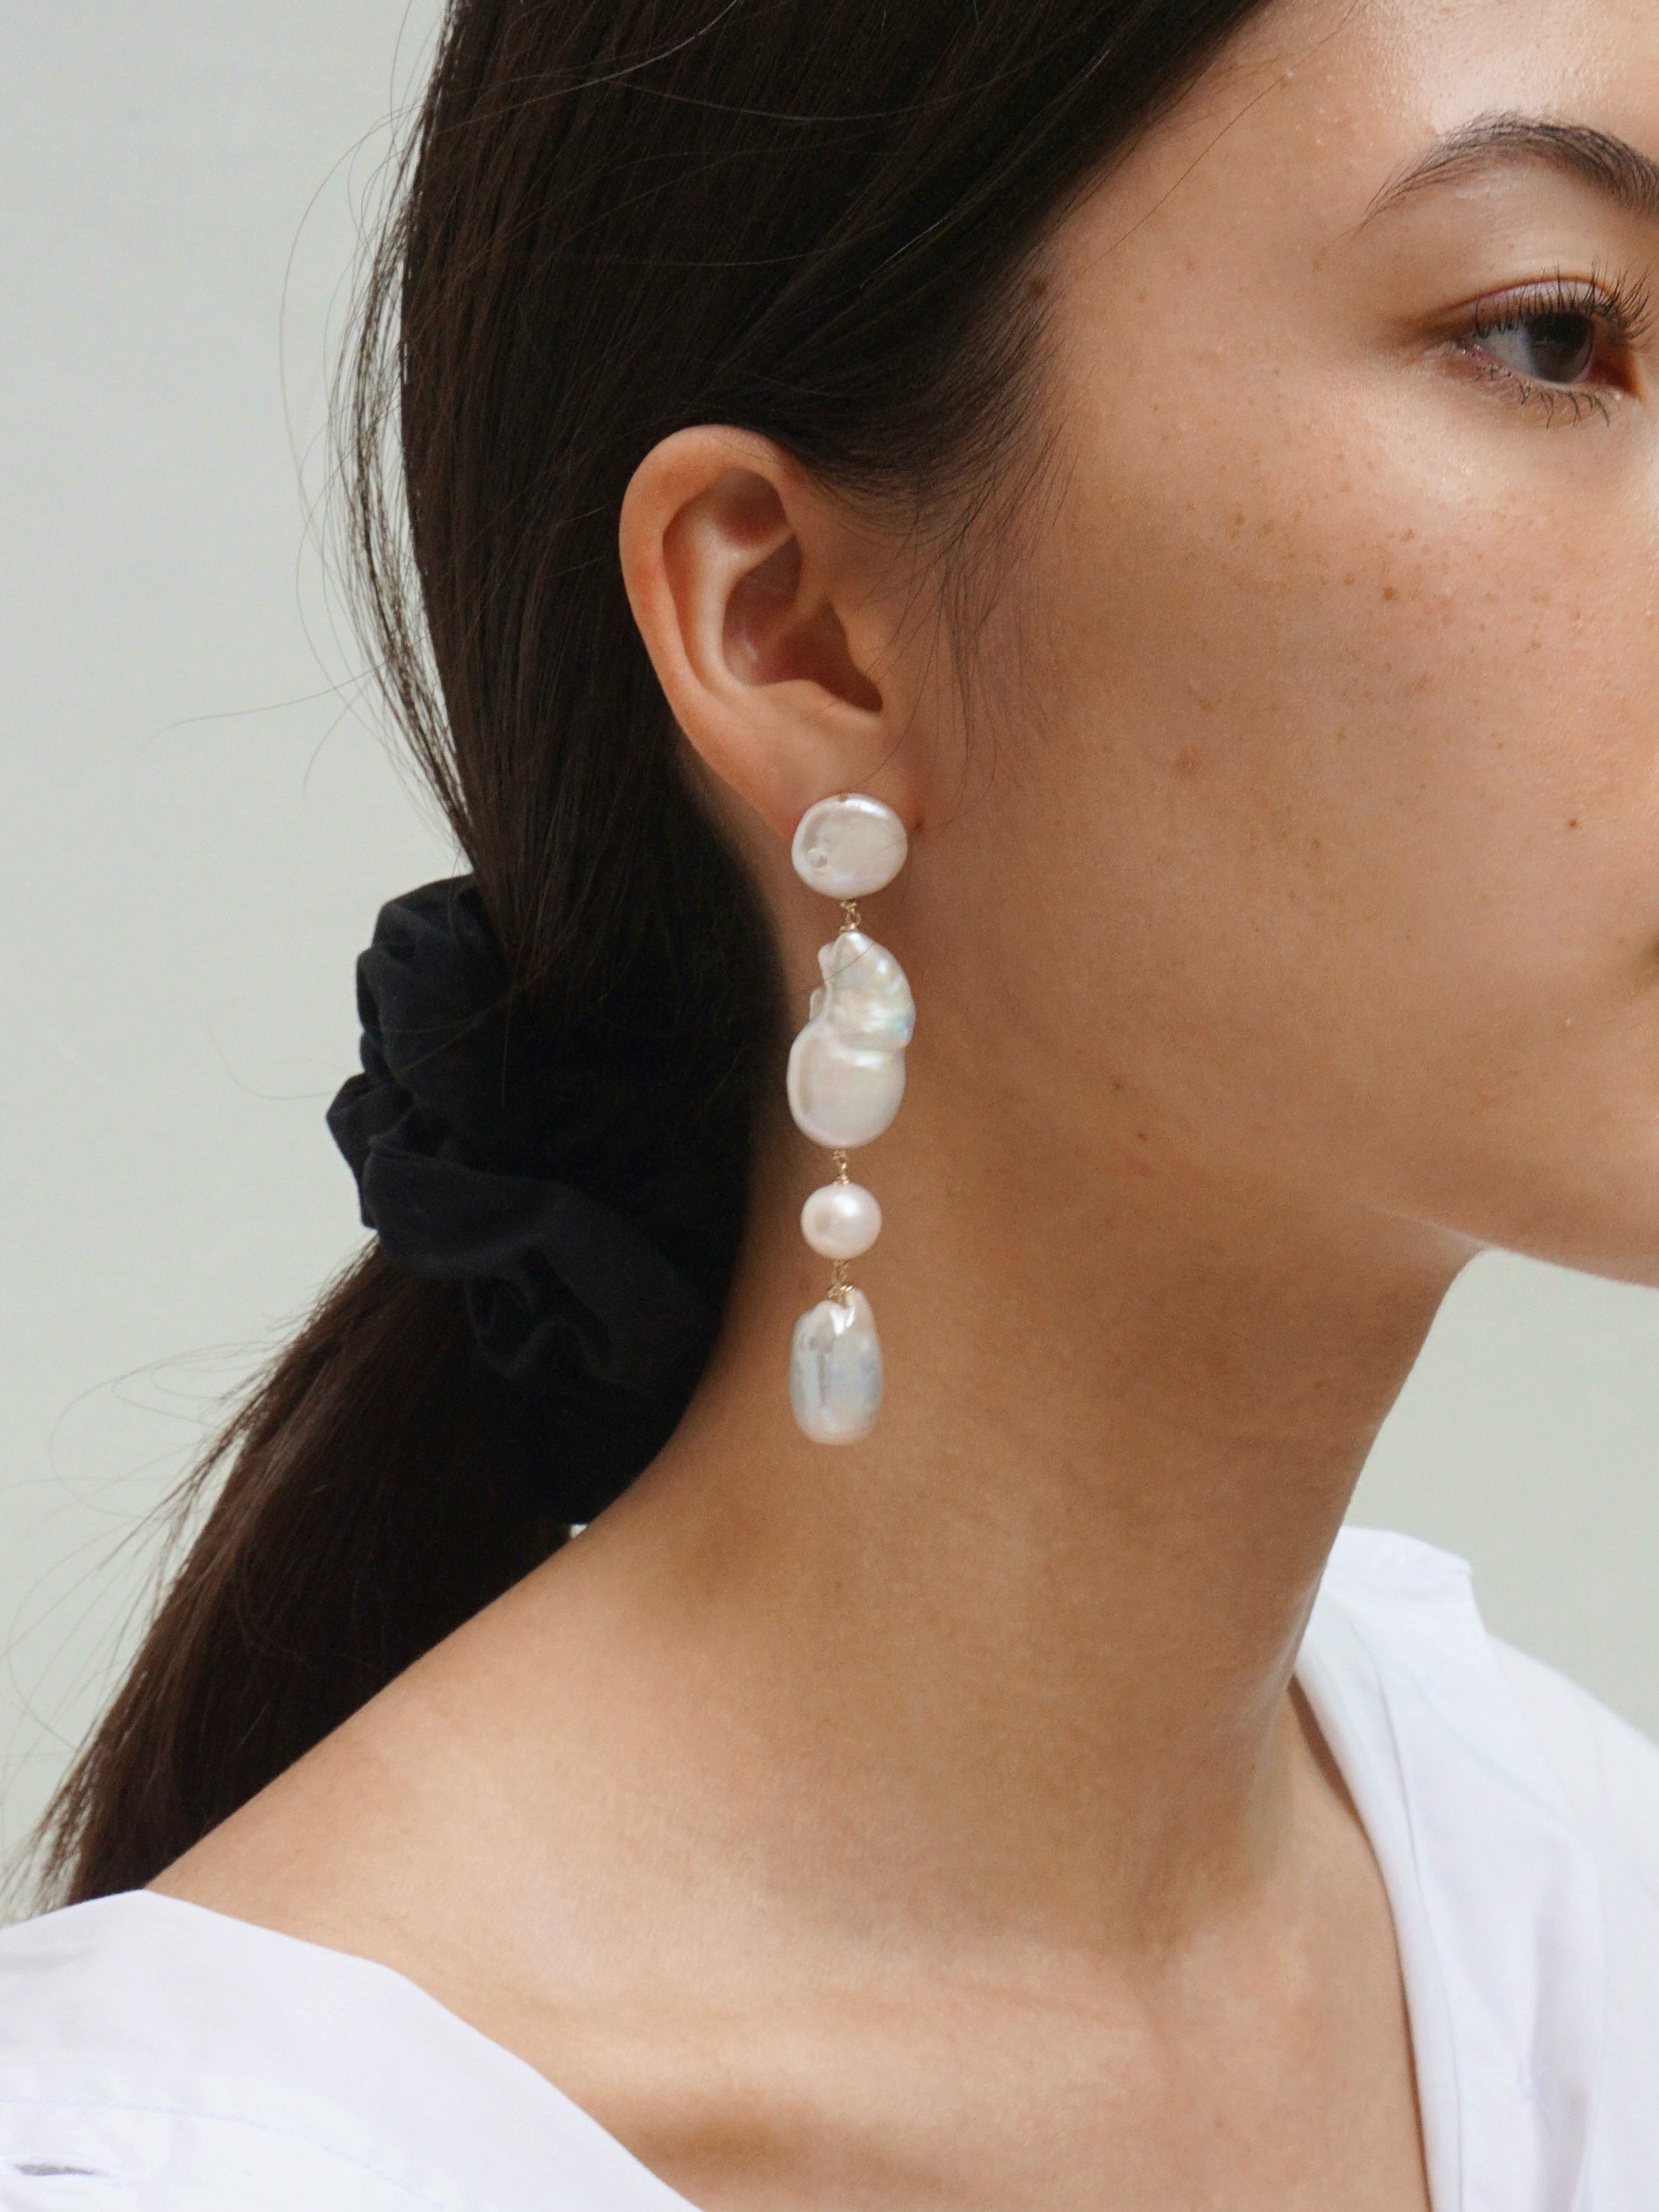 Buy White Pearl Drop Earrings Online at Ajnaa Jewels | LE399